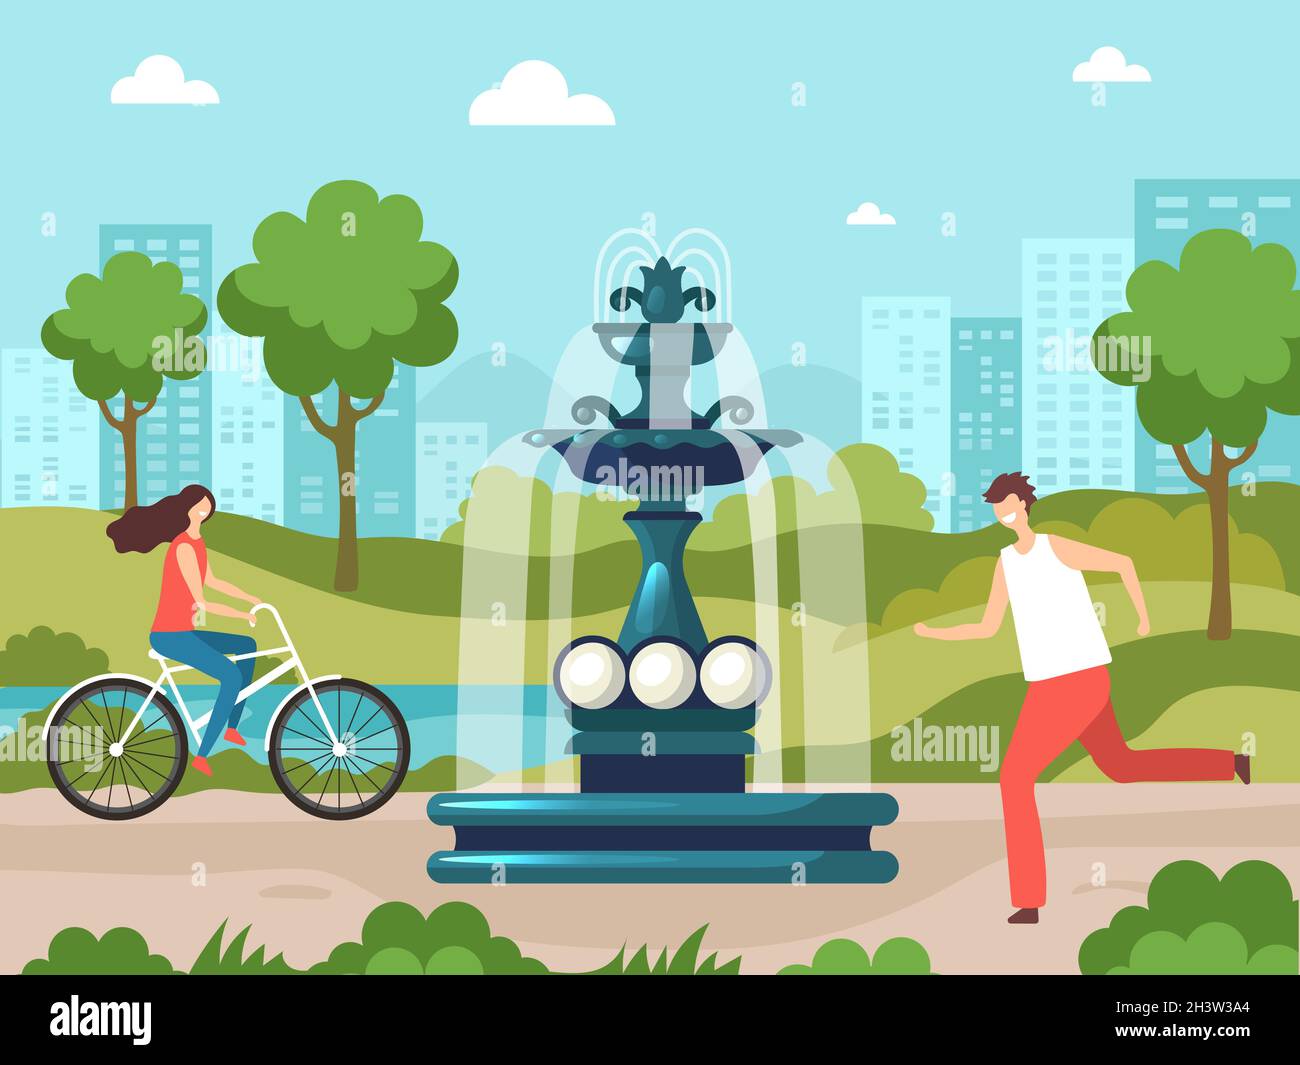 Fountain in park. Nature background urban garden with water decorative fountain ornate objects vector illustrations Stock Vector